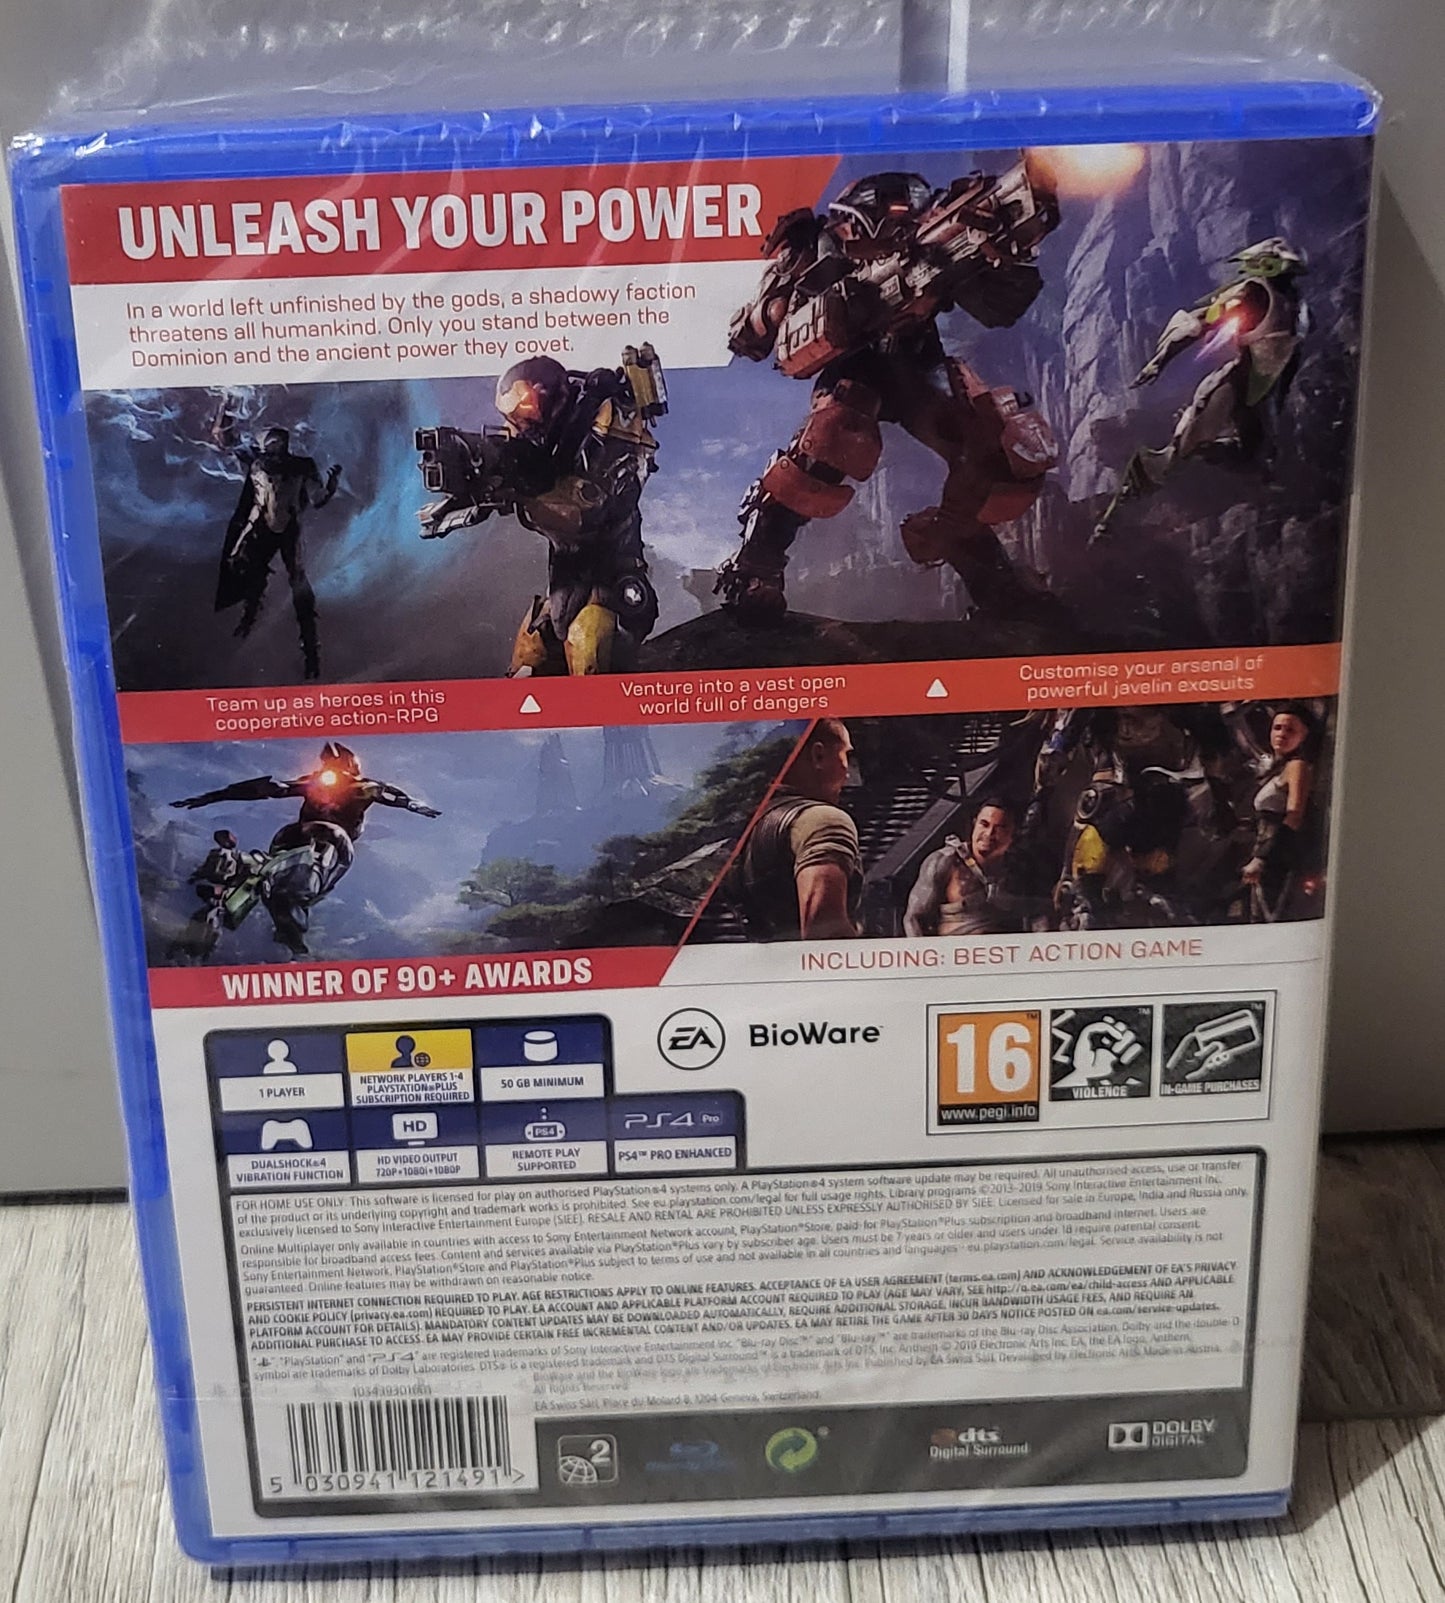 Brand New and Sealed Anthem Sony Playstation 4 (PS4)